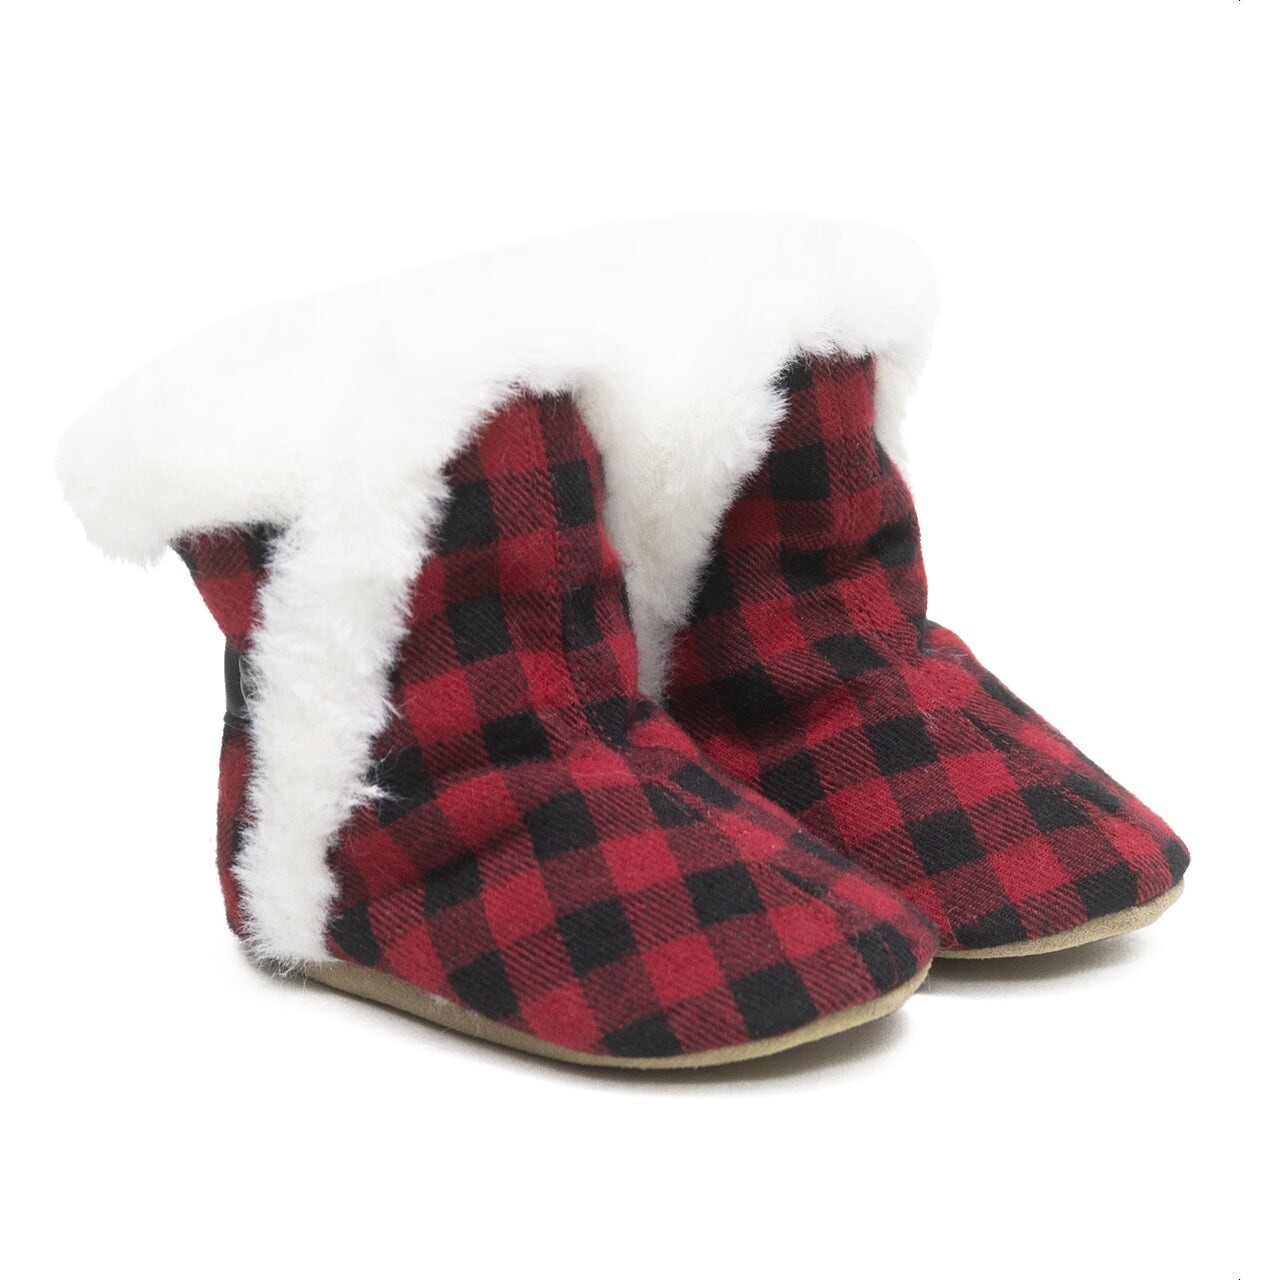 Robeez Jack soft sole boot- red plaid